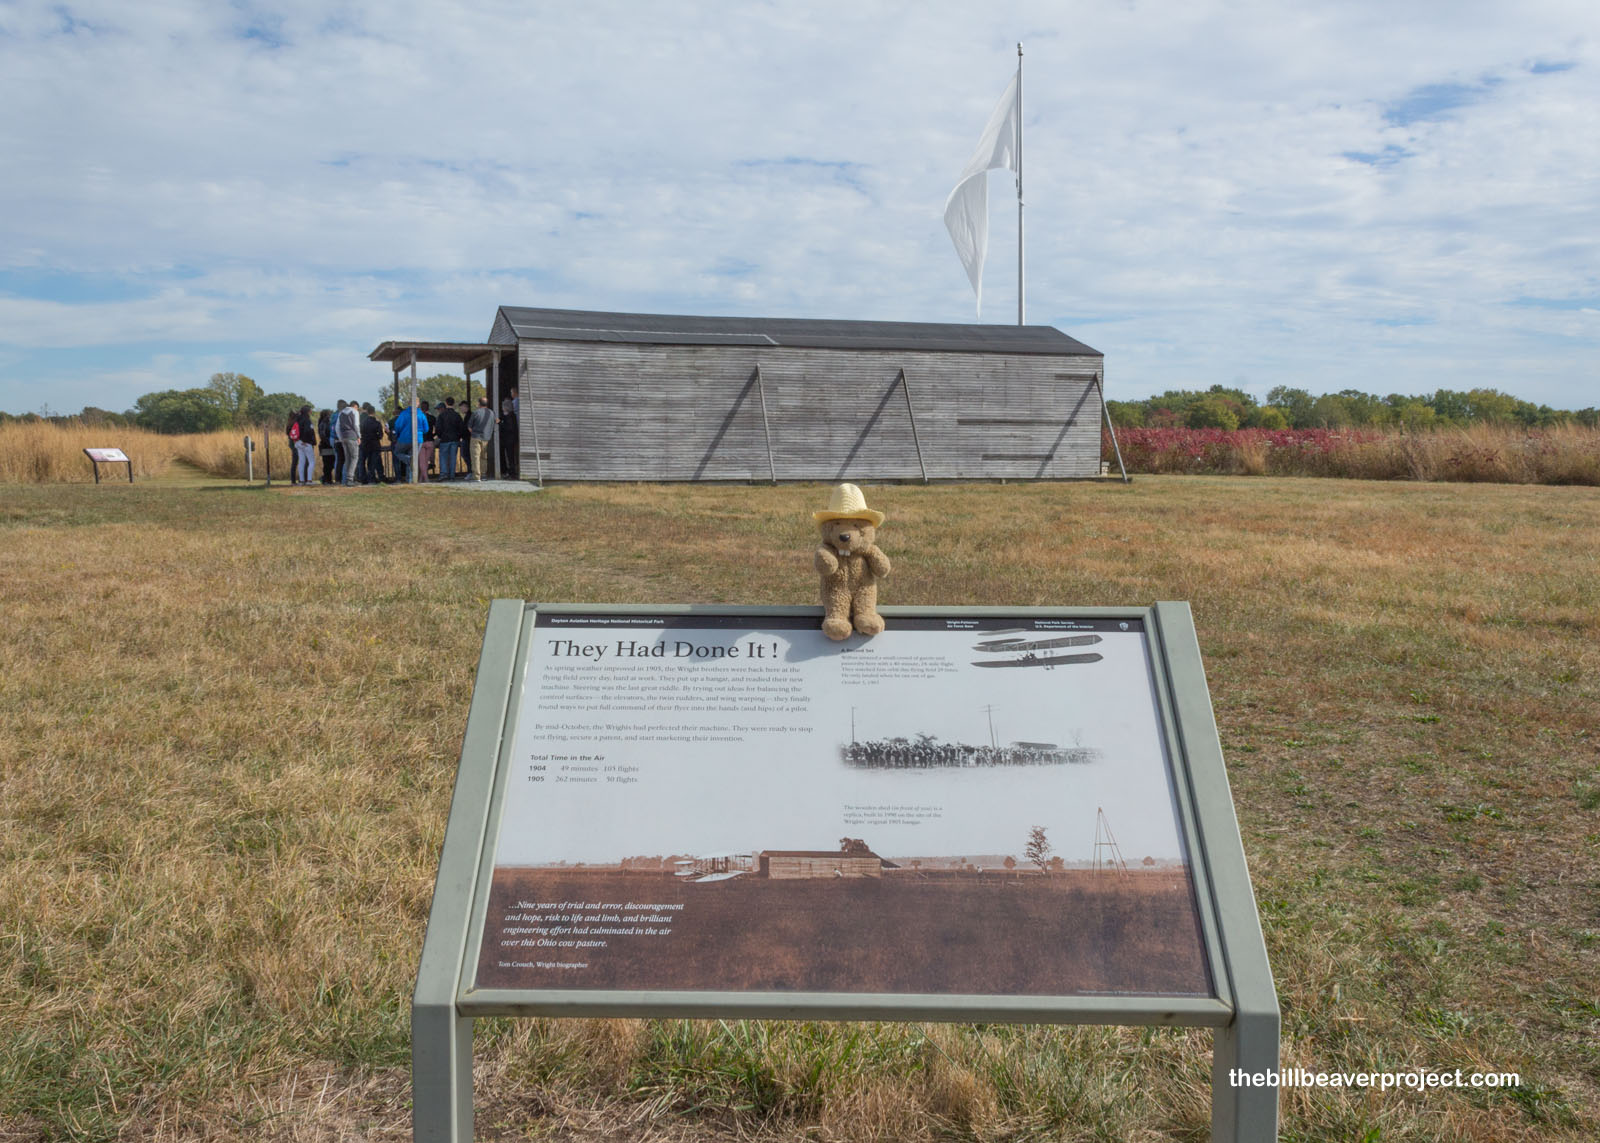 The original launching facilities are reconstructed at Huffman Prairie!